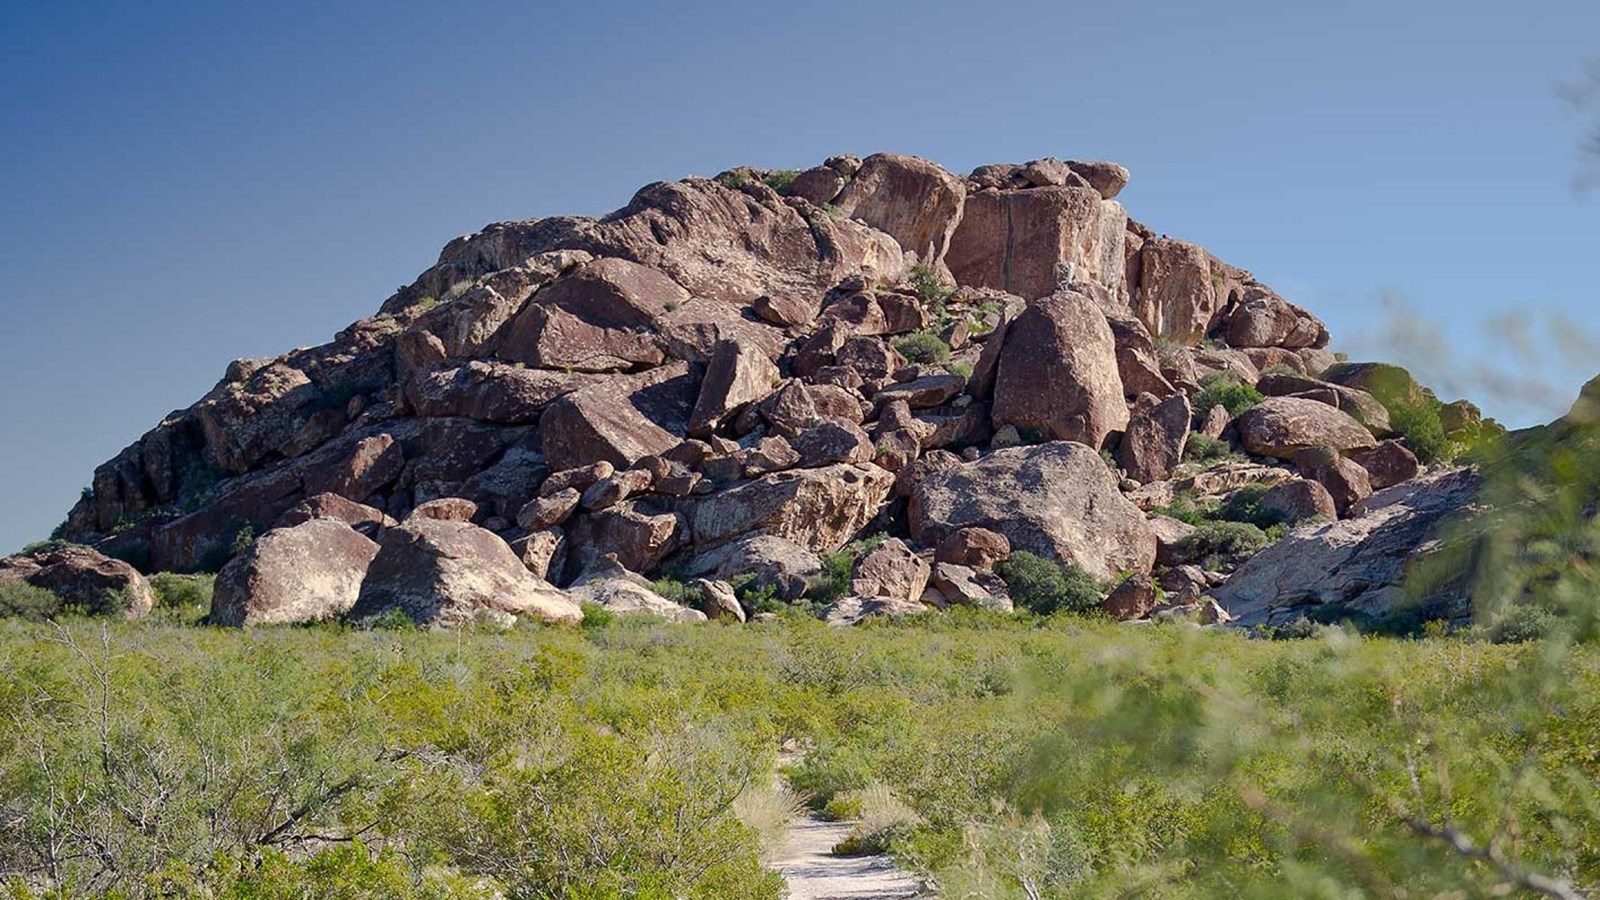 A trail leads to a rock formation